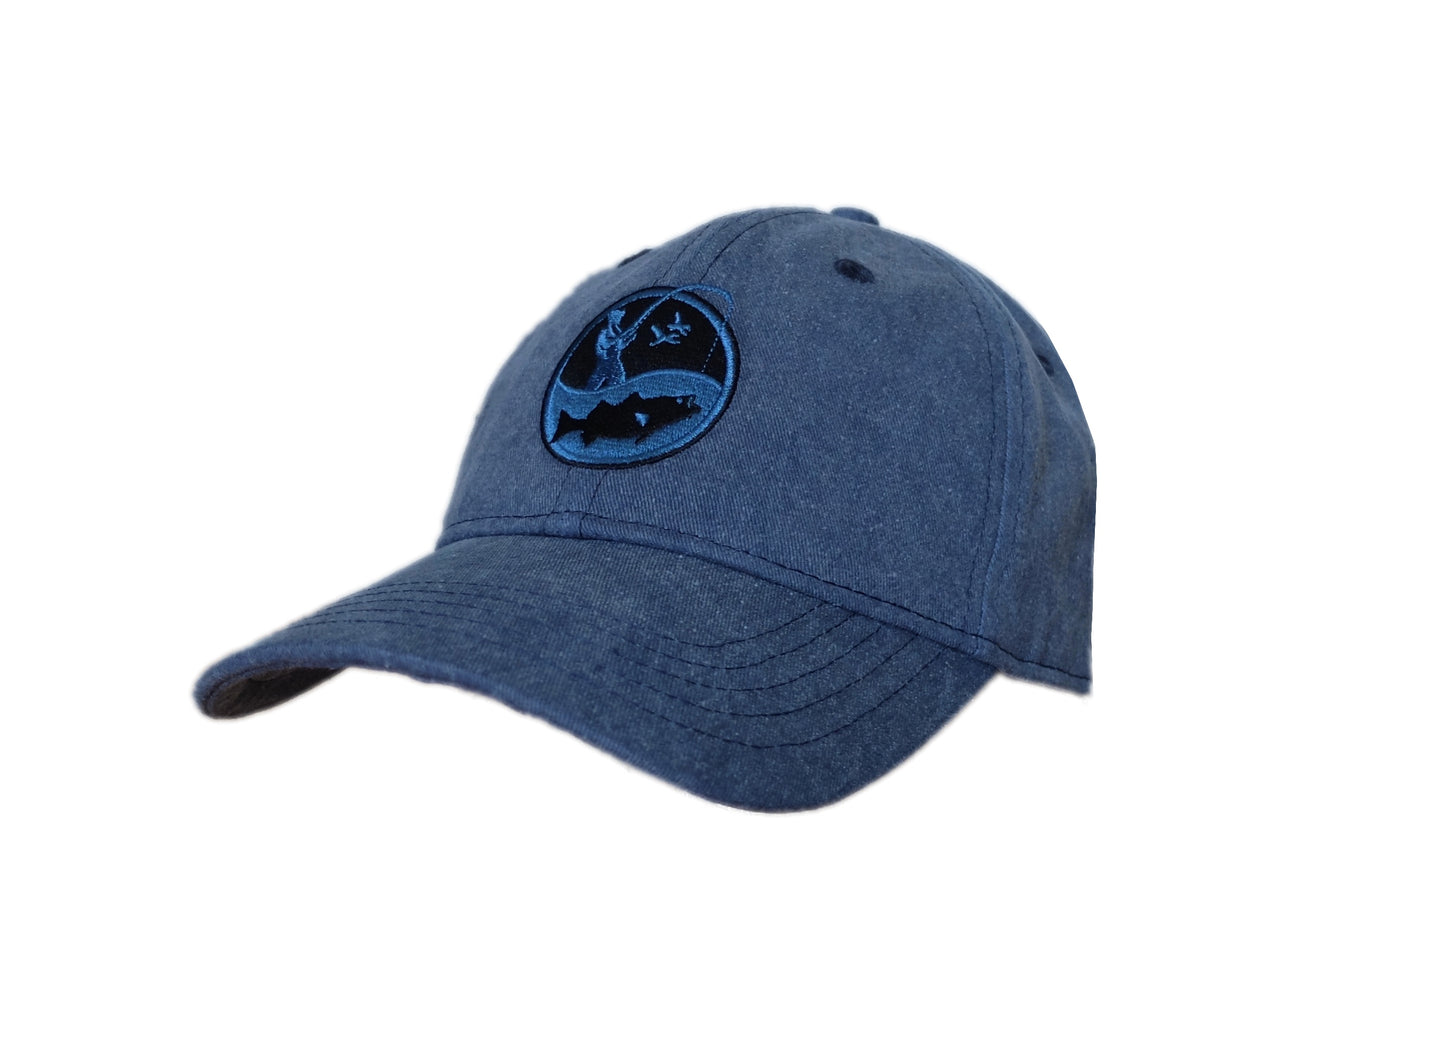 washed navy blue baseball cap with round black and blue embroidered surf fisherman logo